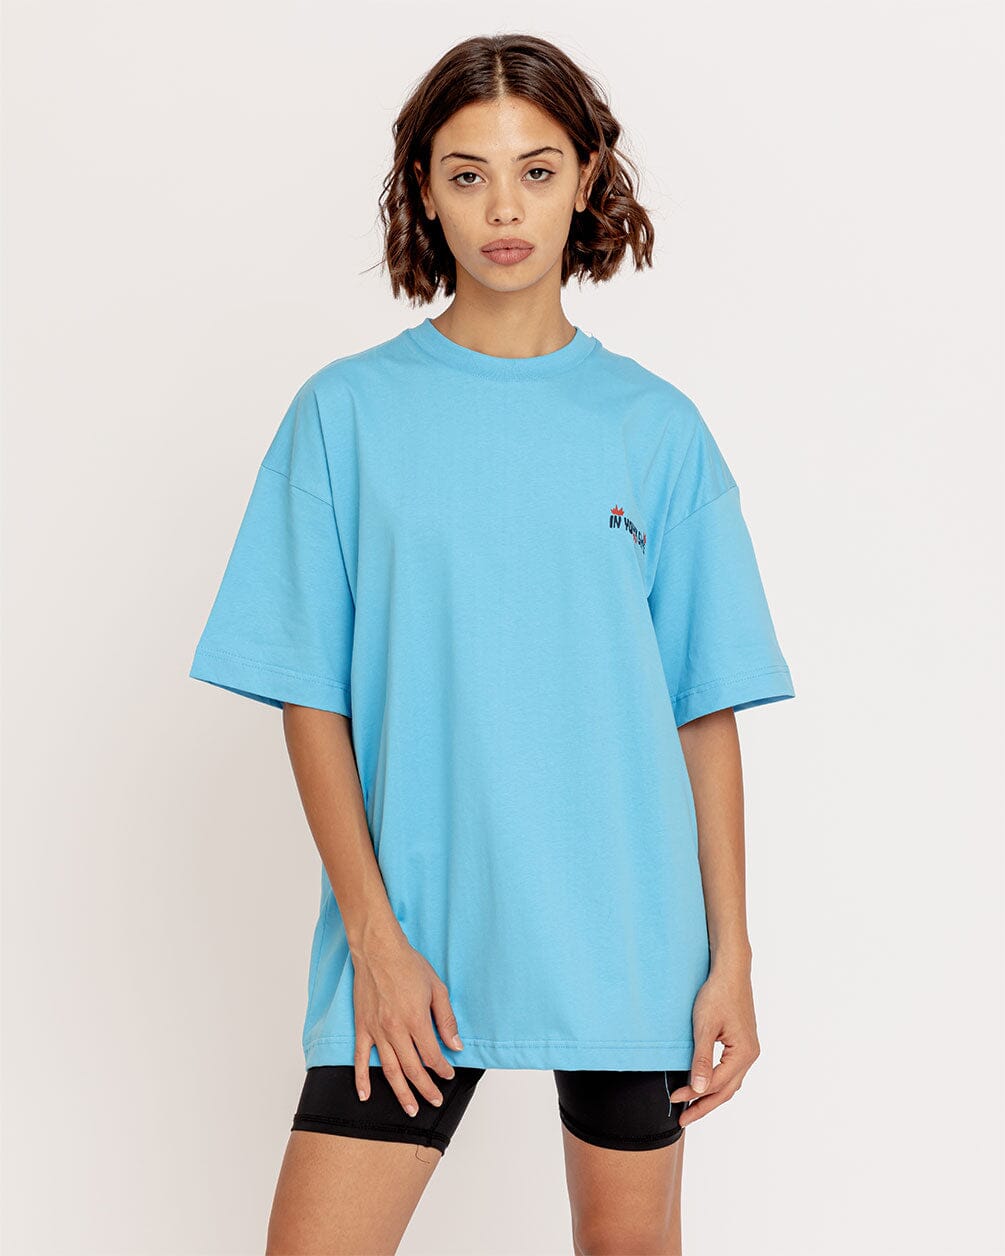 Chaos Printed Oversized Tee Printed Oversized Tees IN YOUR SHOE 